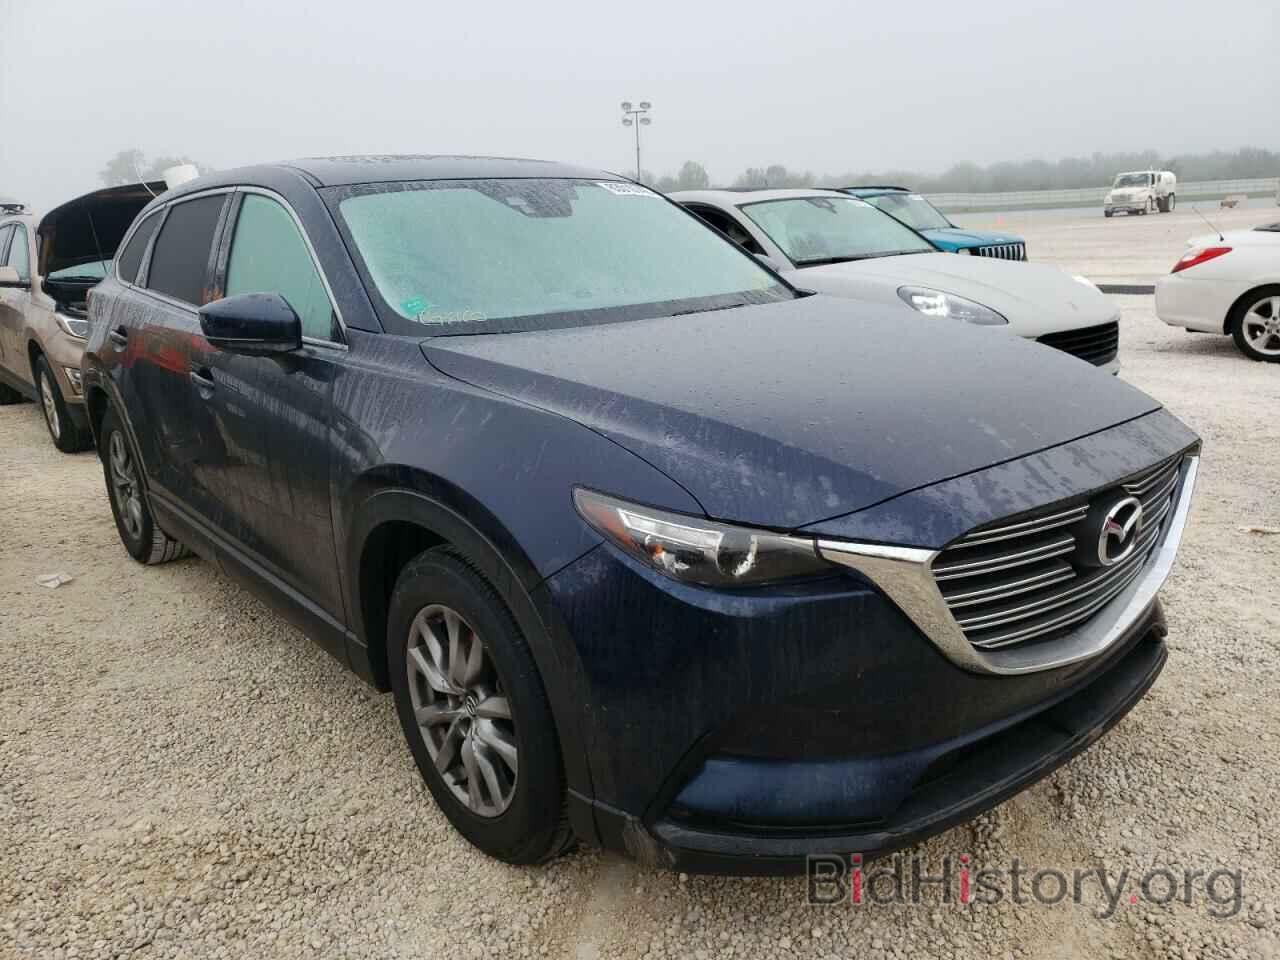 View MAZDA CX-9 history at insurance auctions Copart and IAAI 